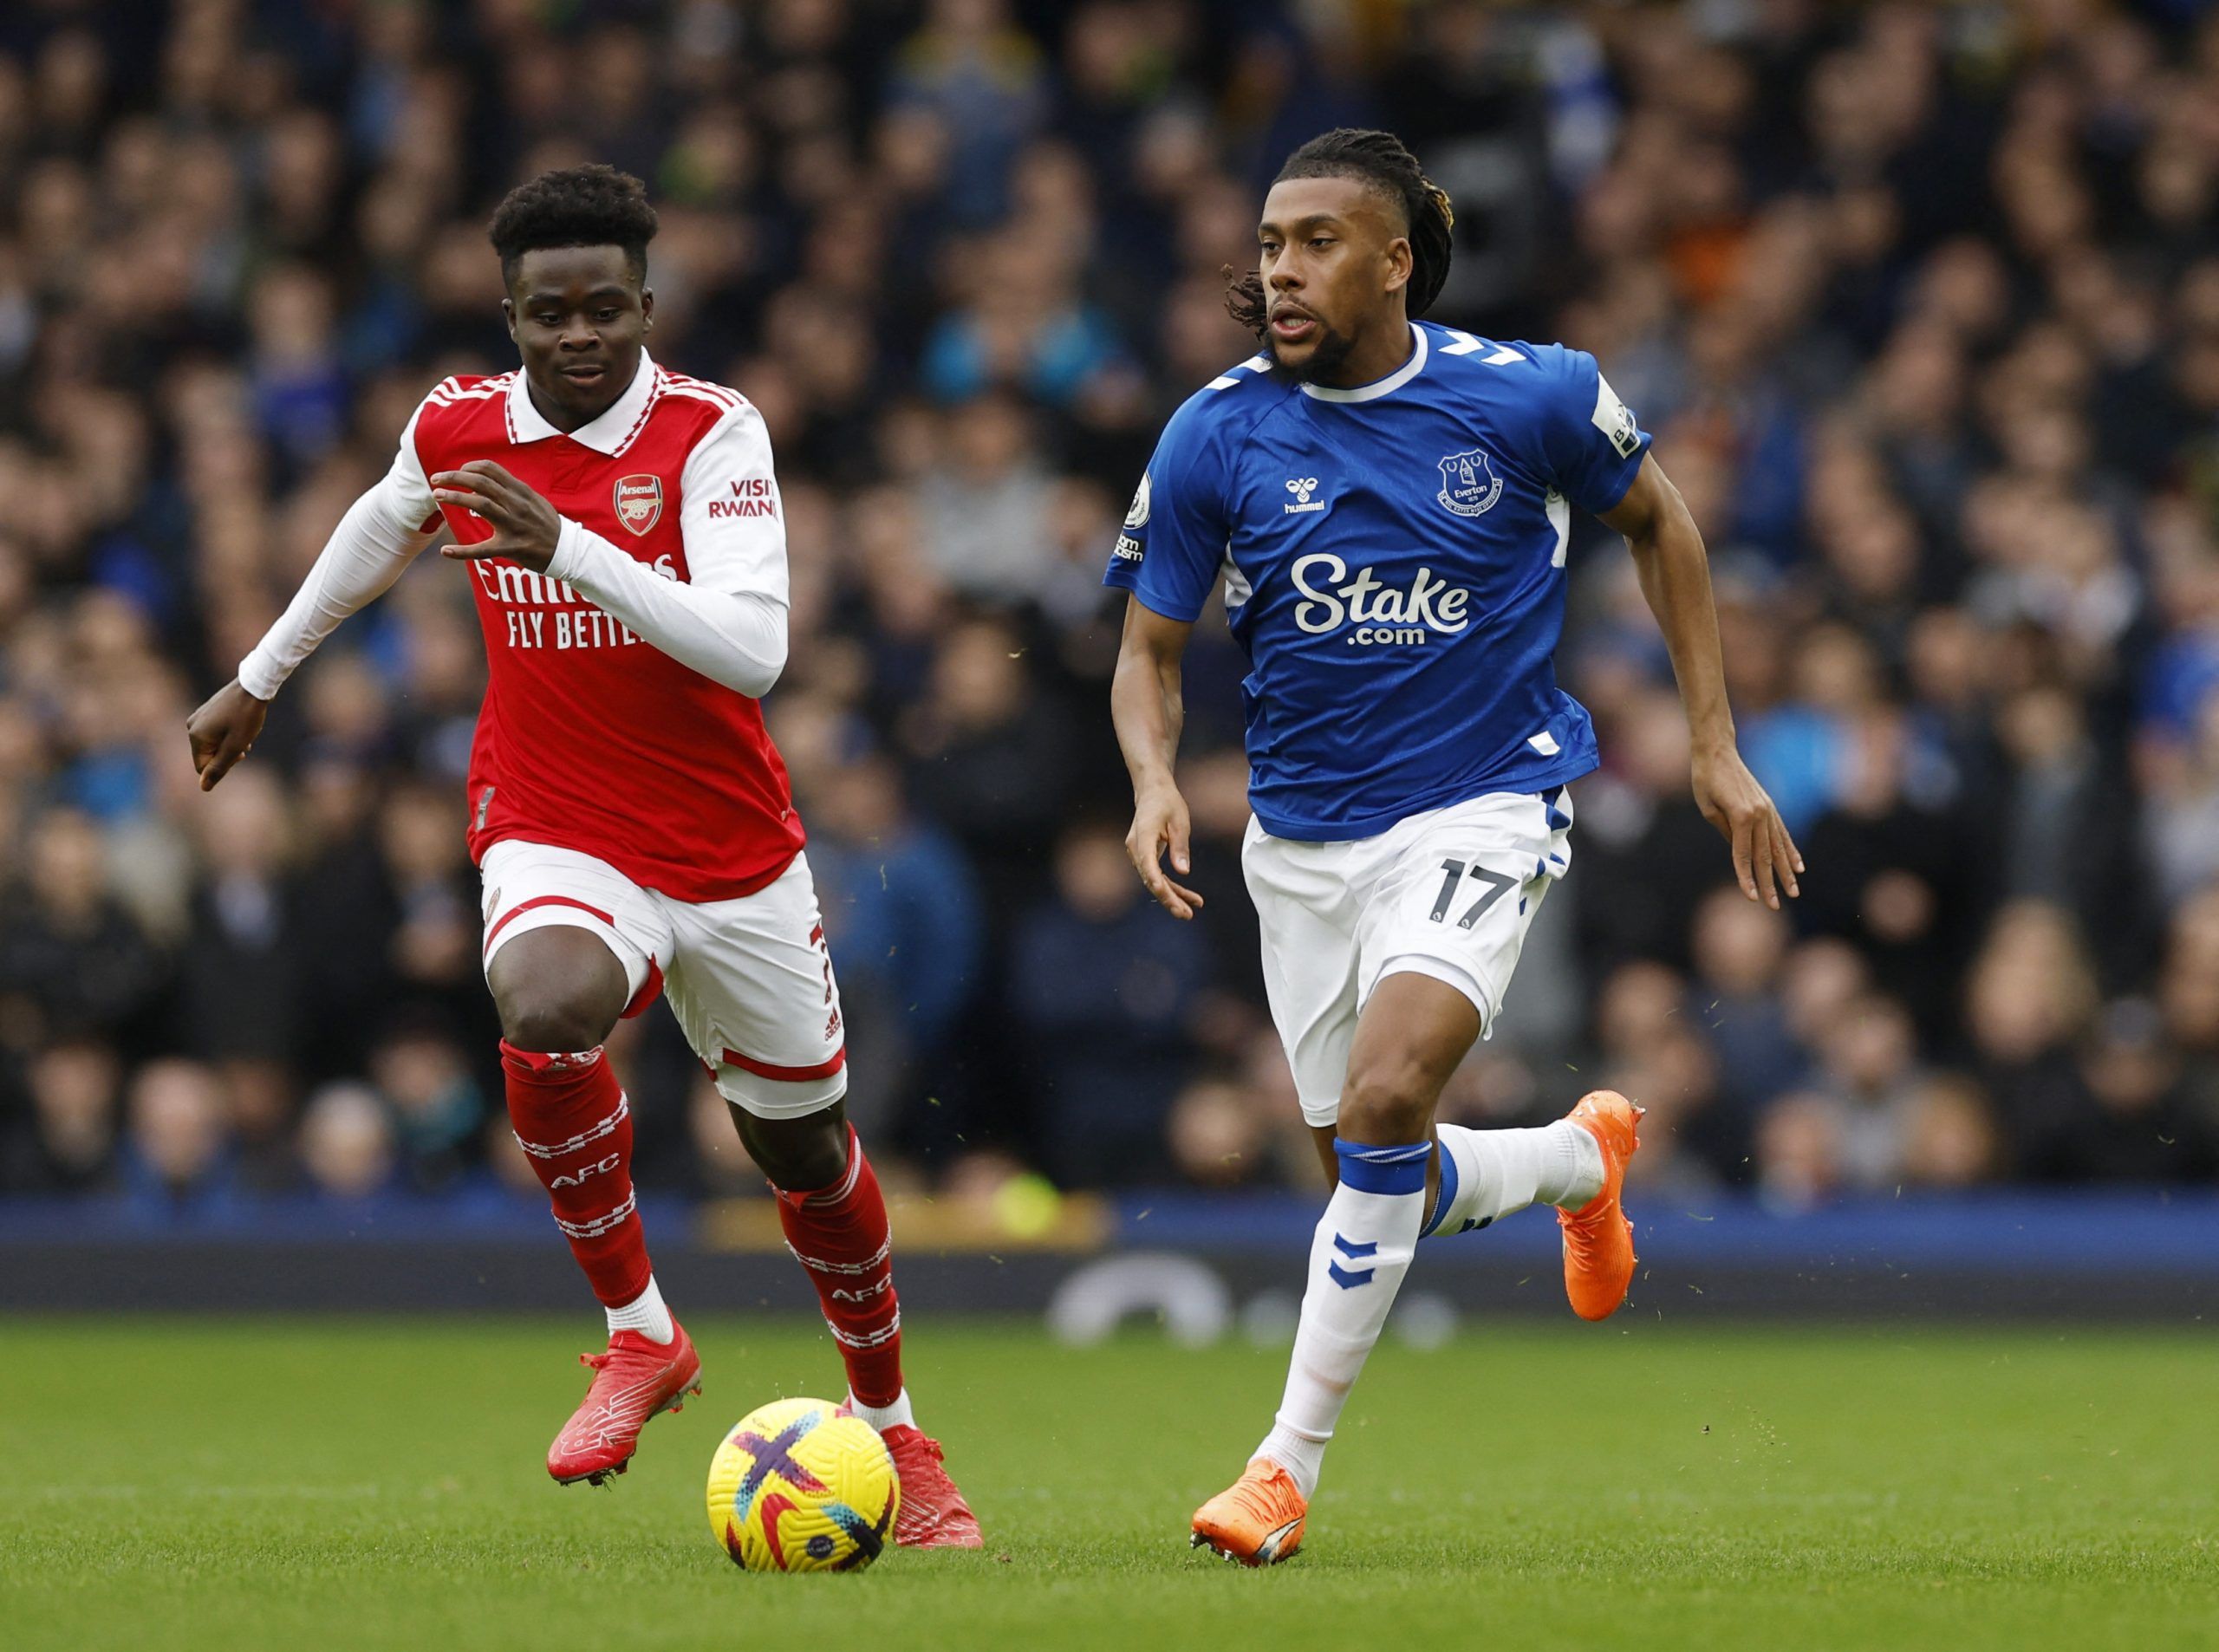 Soccer Football - Premier League - Everton v Arsenal - Goodison Park, Liverpool, Britain - February 4, 2023 Arsenal's Bukayo Saka in action with Everton's Alex Iwobi Action Images via Reuters/Jason Cairnduff EDITORIAL USE ONLY. No use with unauthorized audio, video, data, fixture lists, club/league logos or 'live' services. Online in-match use limited to 75 images, no video emulation. No use in betting, games or single club /league/player publications.  Please contact your account representative